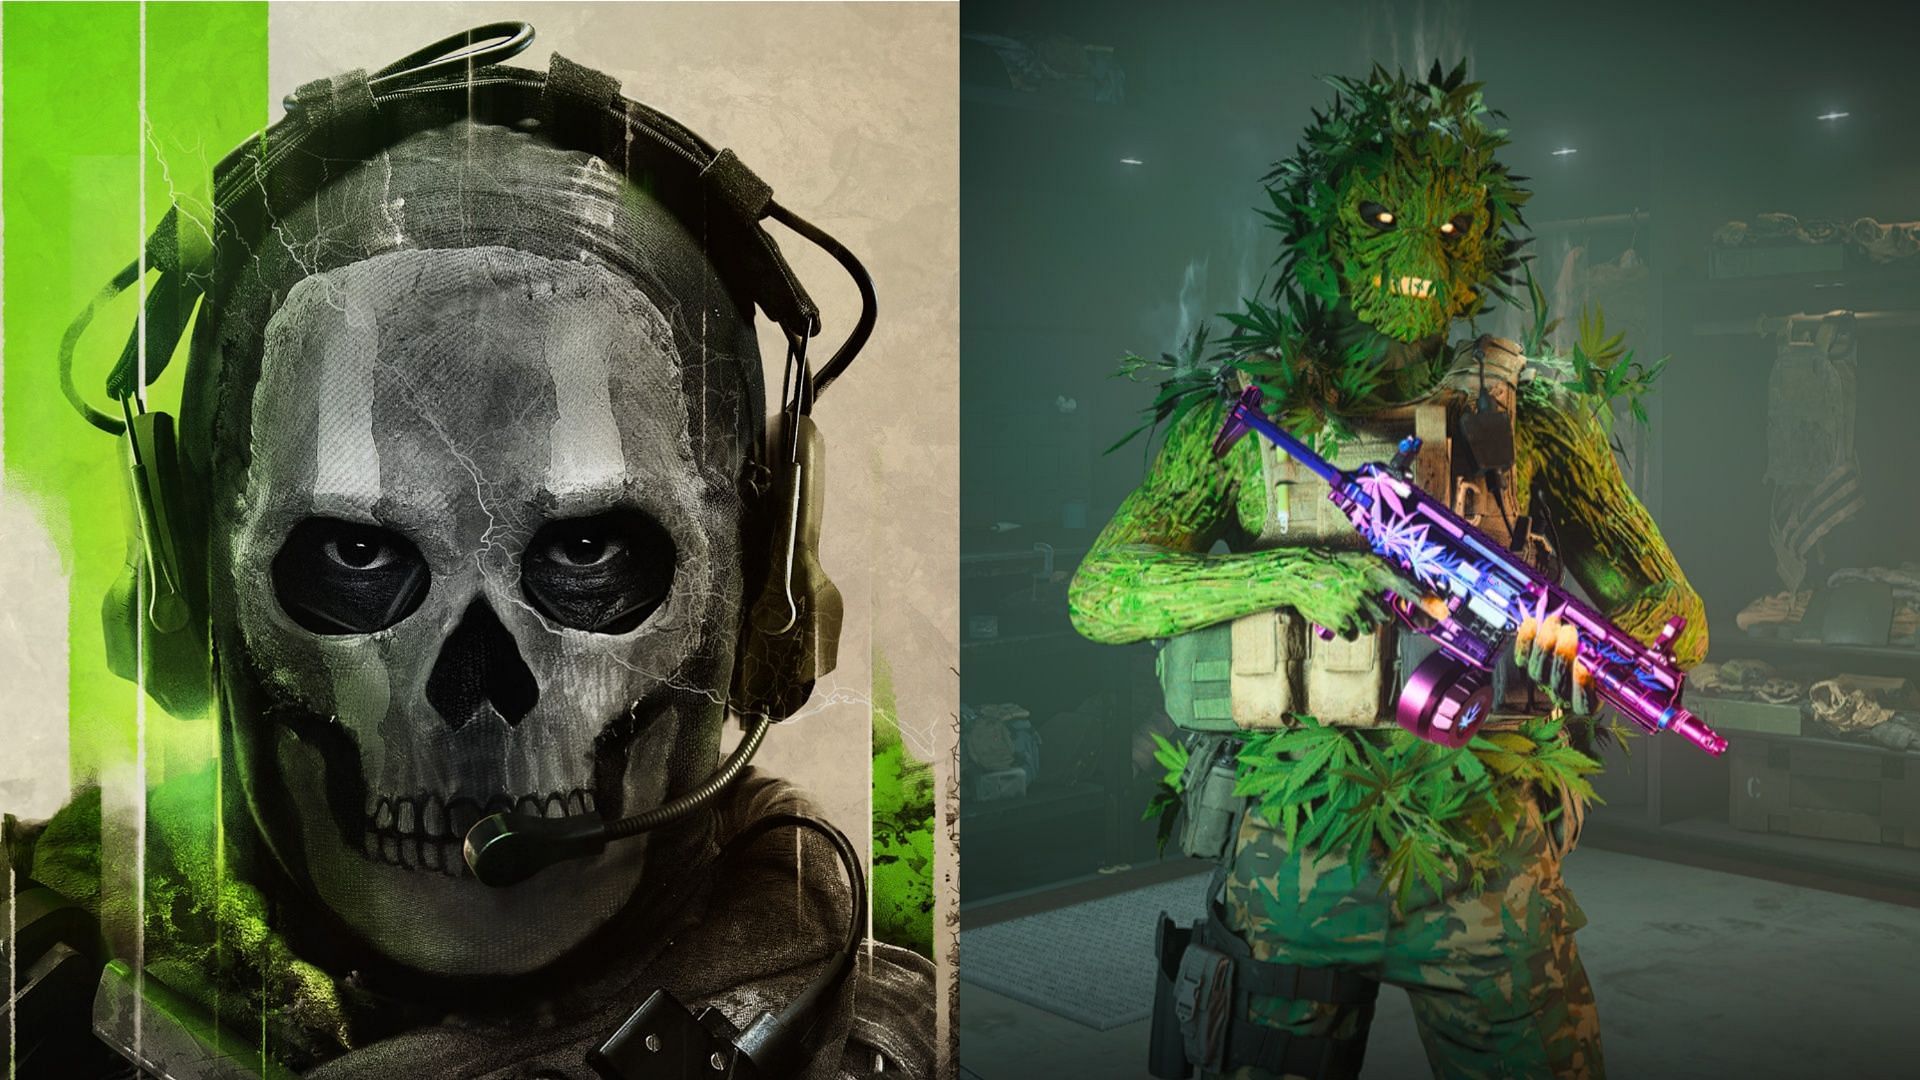 Operator Ghost on the left and Blunt Fingers Operator on the right.